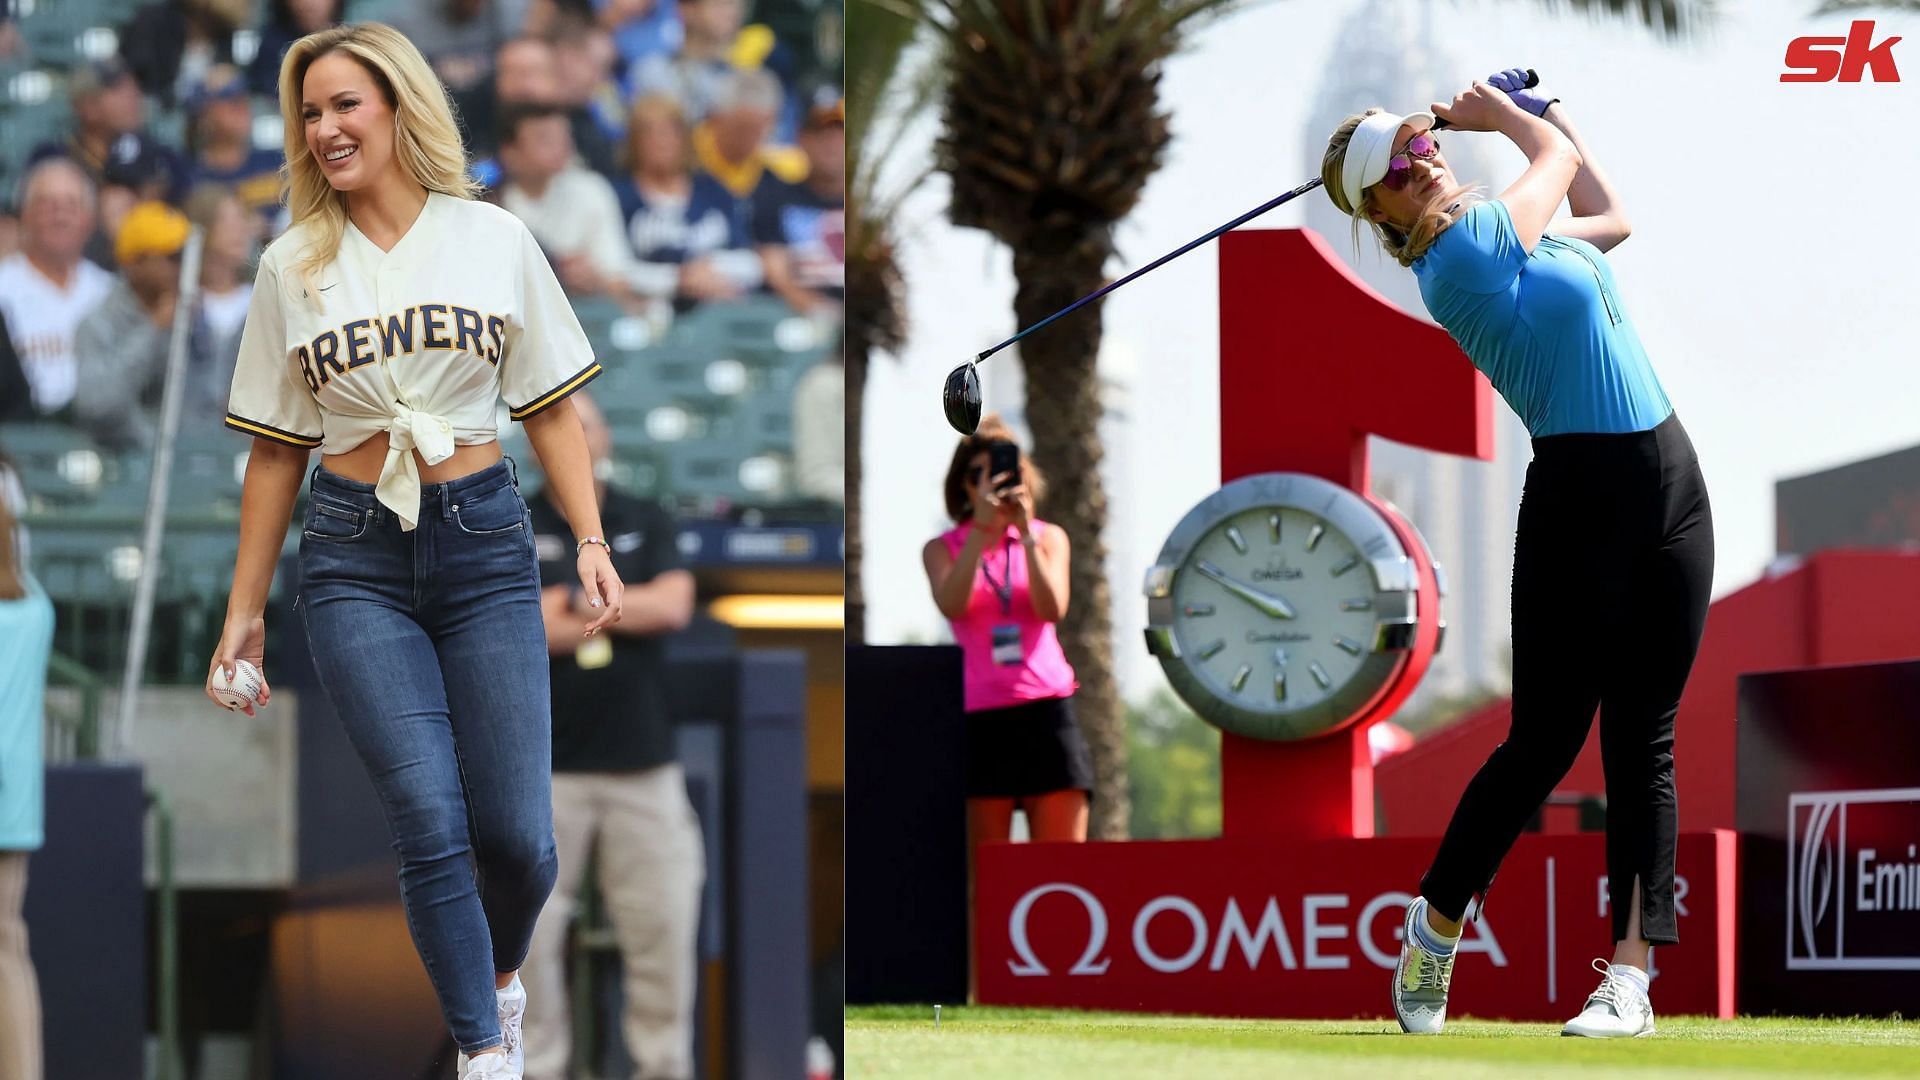 Former golfer and social media personality Paige Spiranac throwing out the first pitch in the game between Milwaukee Brewers and Pittsburgh Pirates.